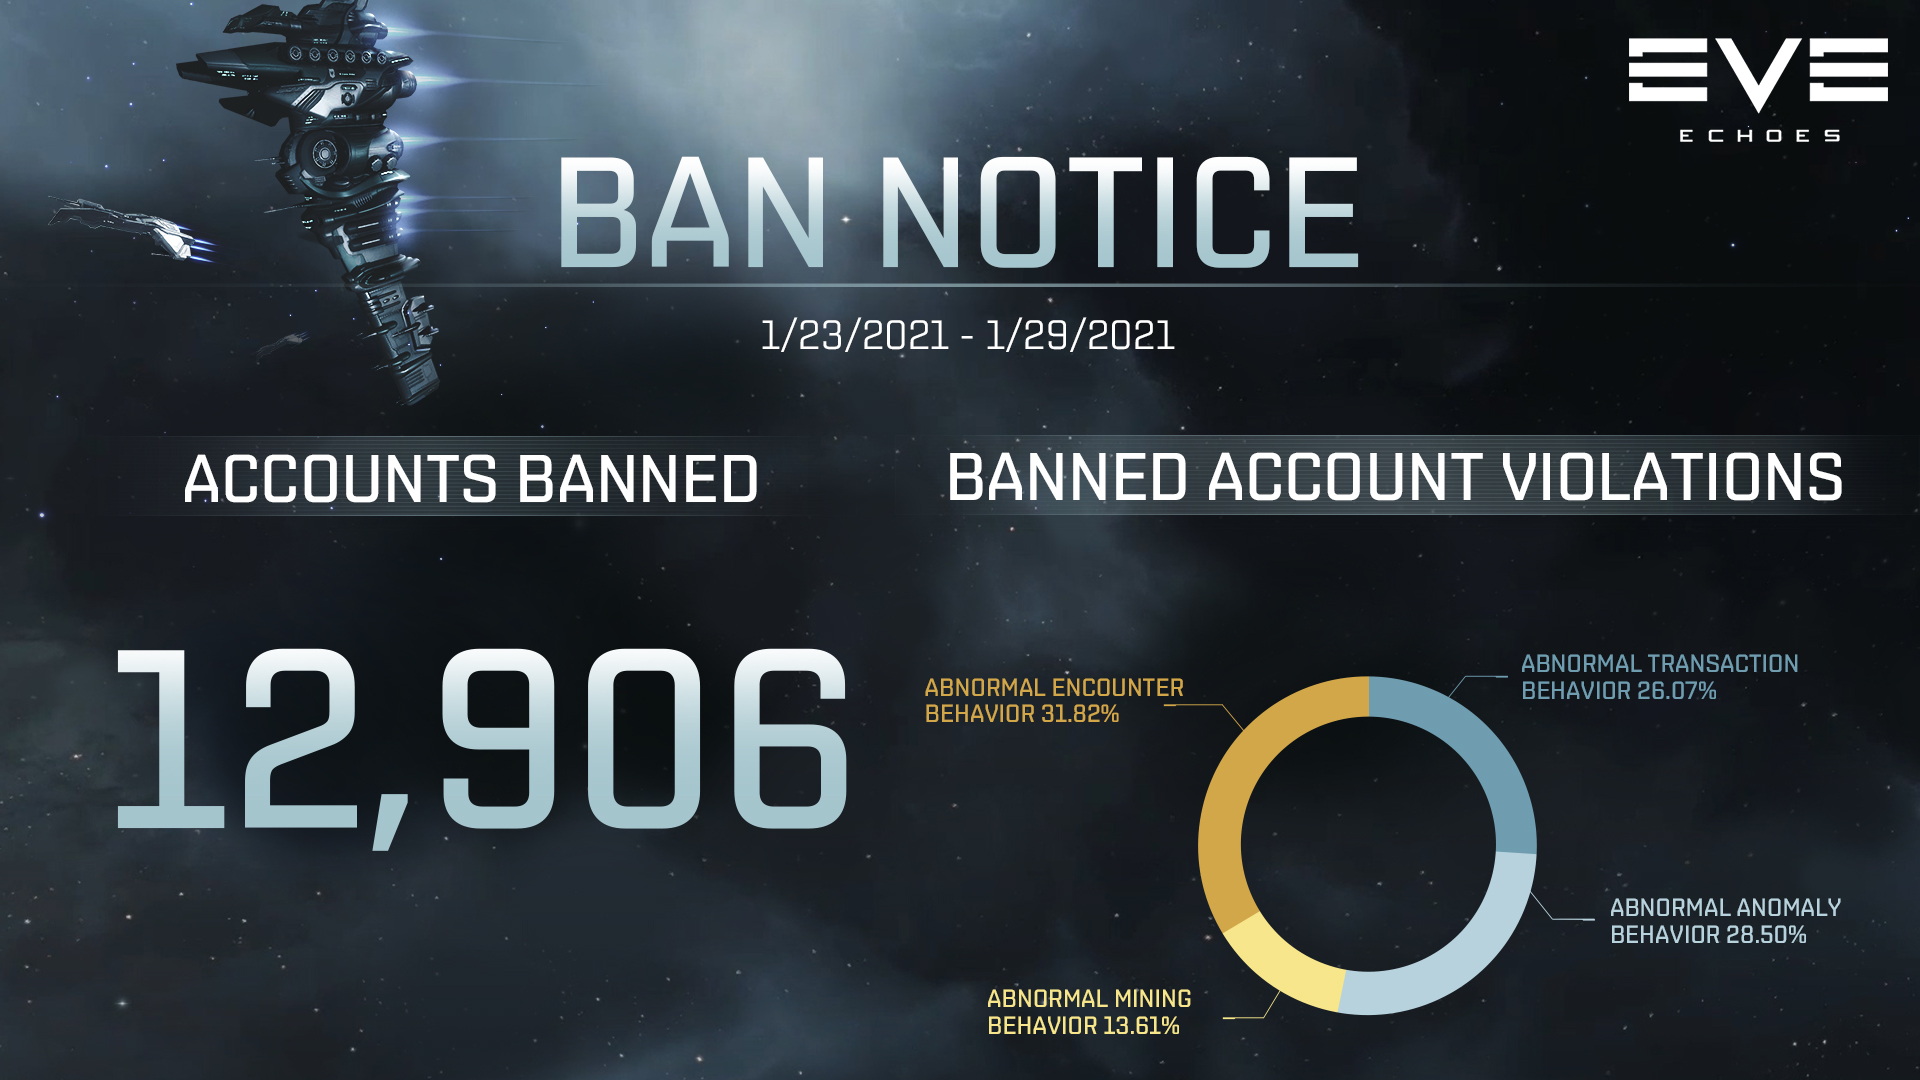 Ban Notice for 01/23-01/29